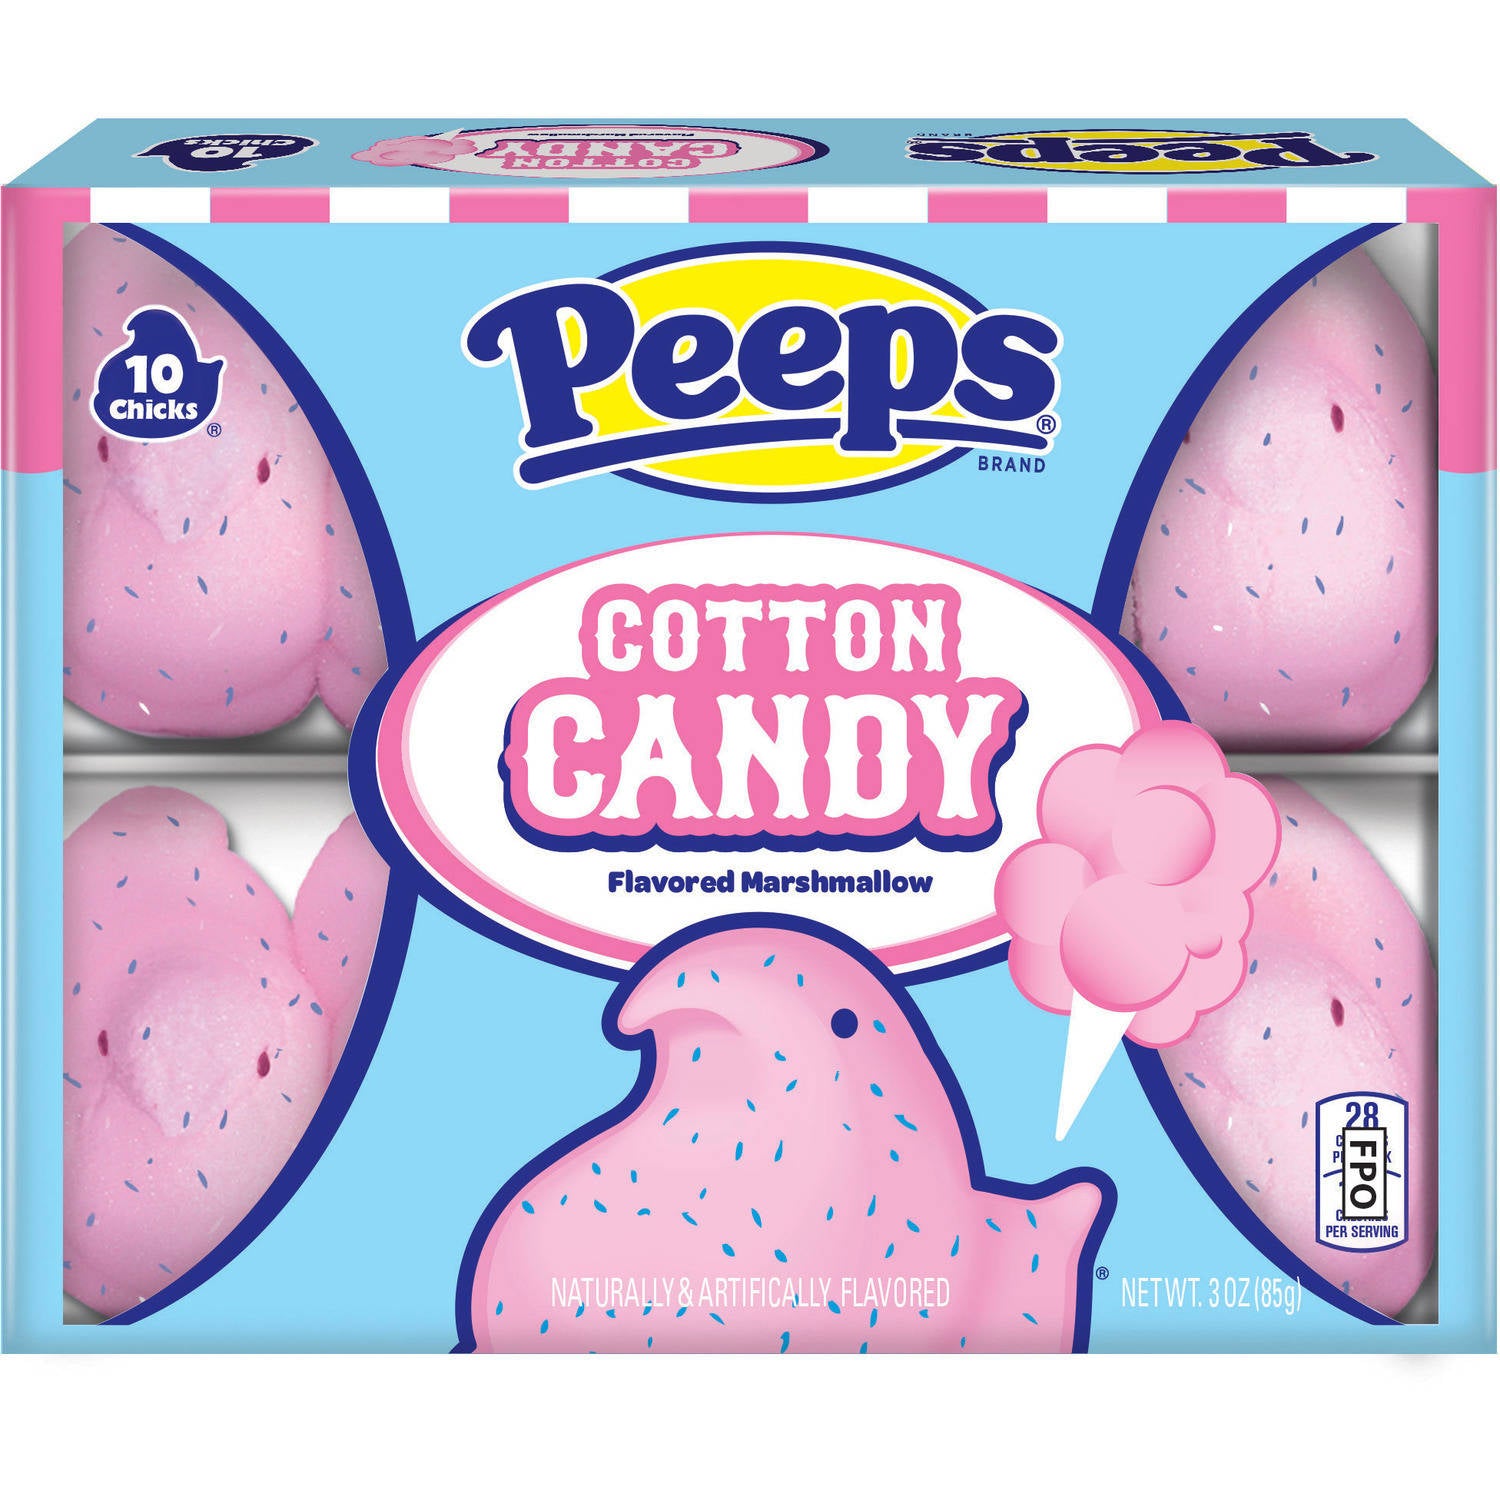 Peeps Cotton Candy Easter Candy, 3 Oz., 10 Count